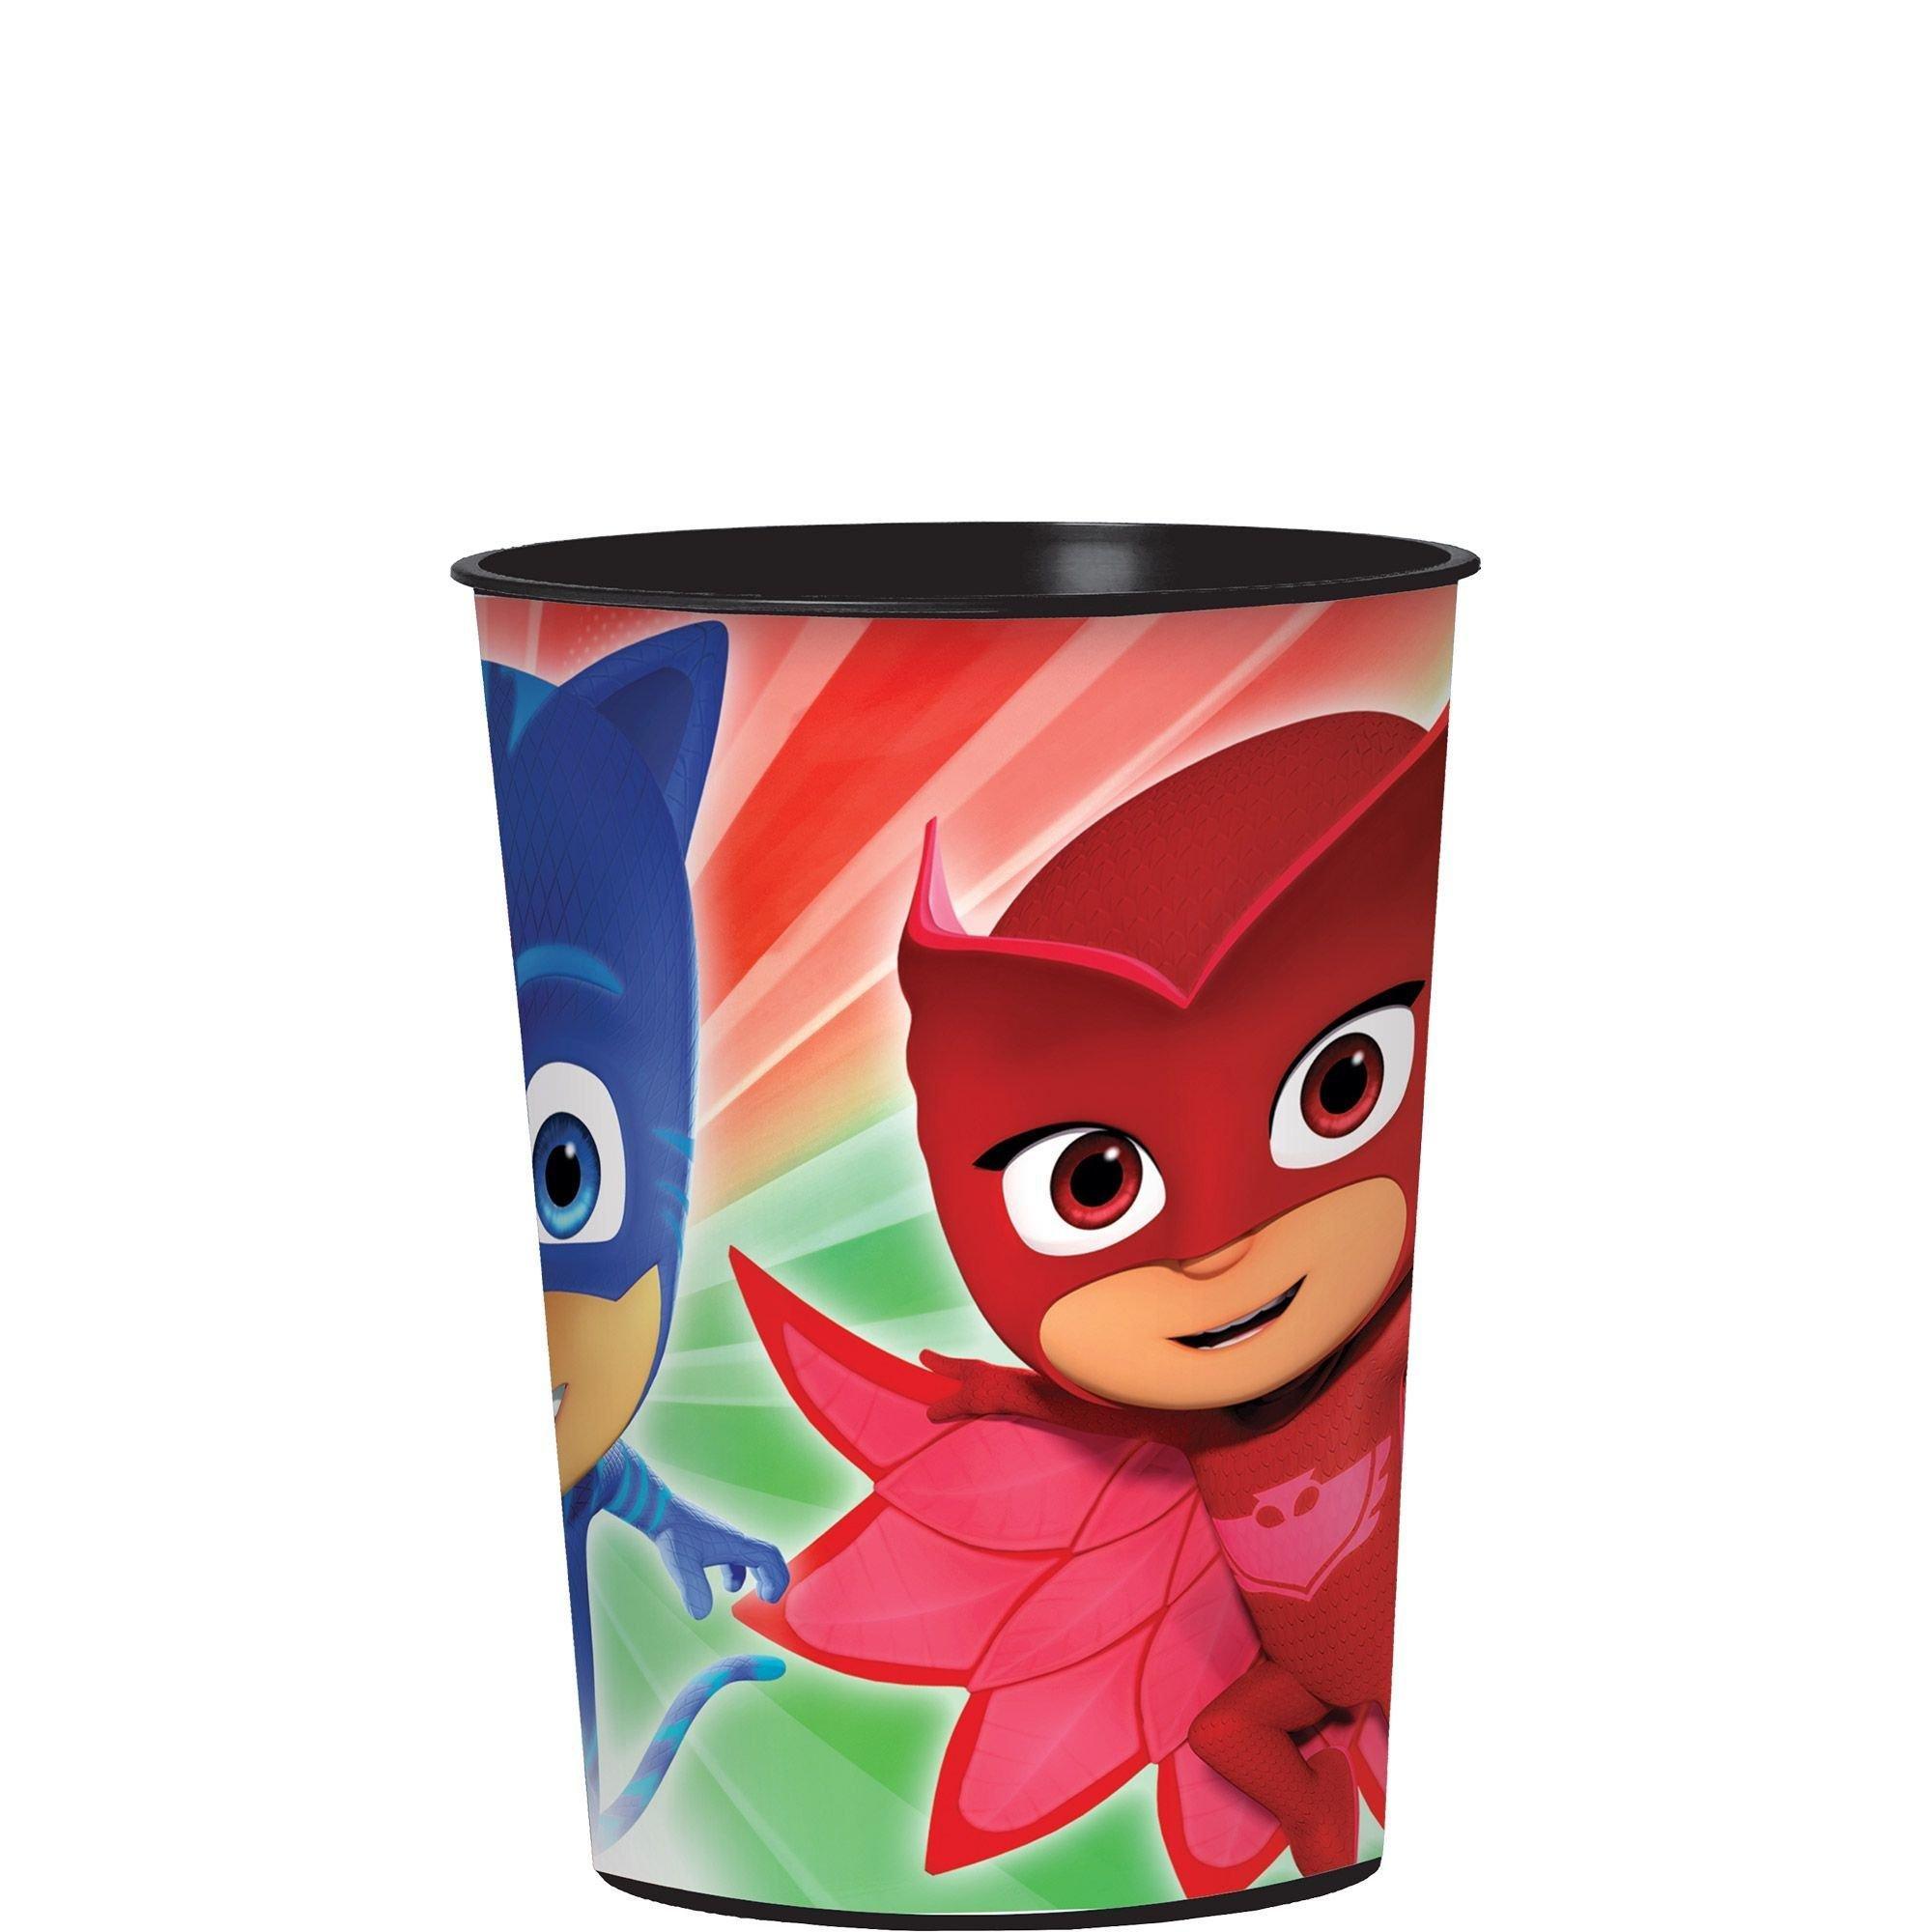 Glad for Kids 12 oz PJ Masks Comics Paper Snack Bowls with Lids, 20 Ct, Disposable Paper Bowls with Lid with PJ Masks Superhero Comics Design, Kids Snack Bowls for Everyday Use